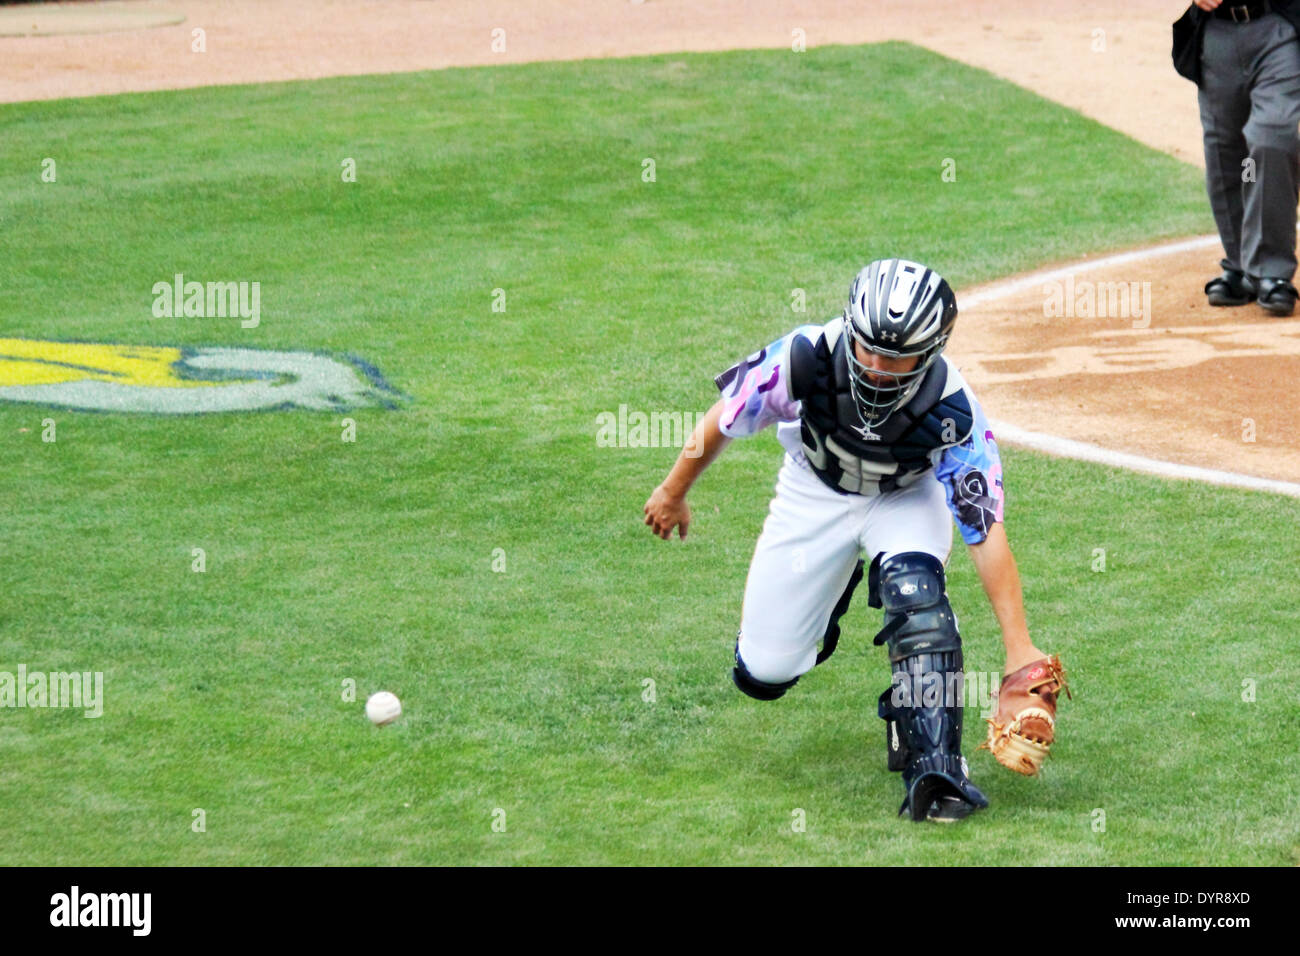 A baseball catcher chases a wild pitch. Stock Photo